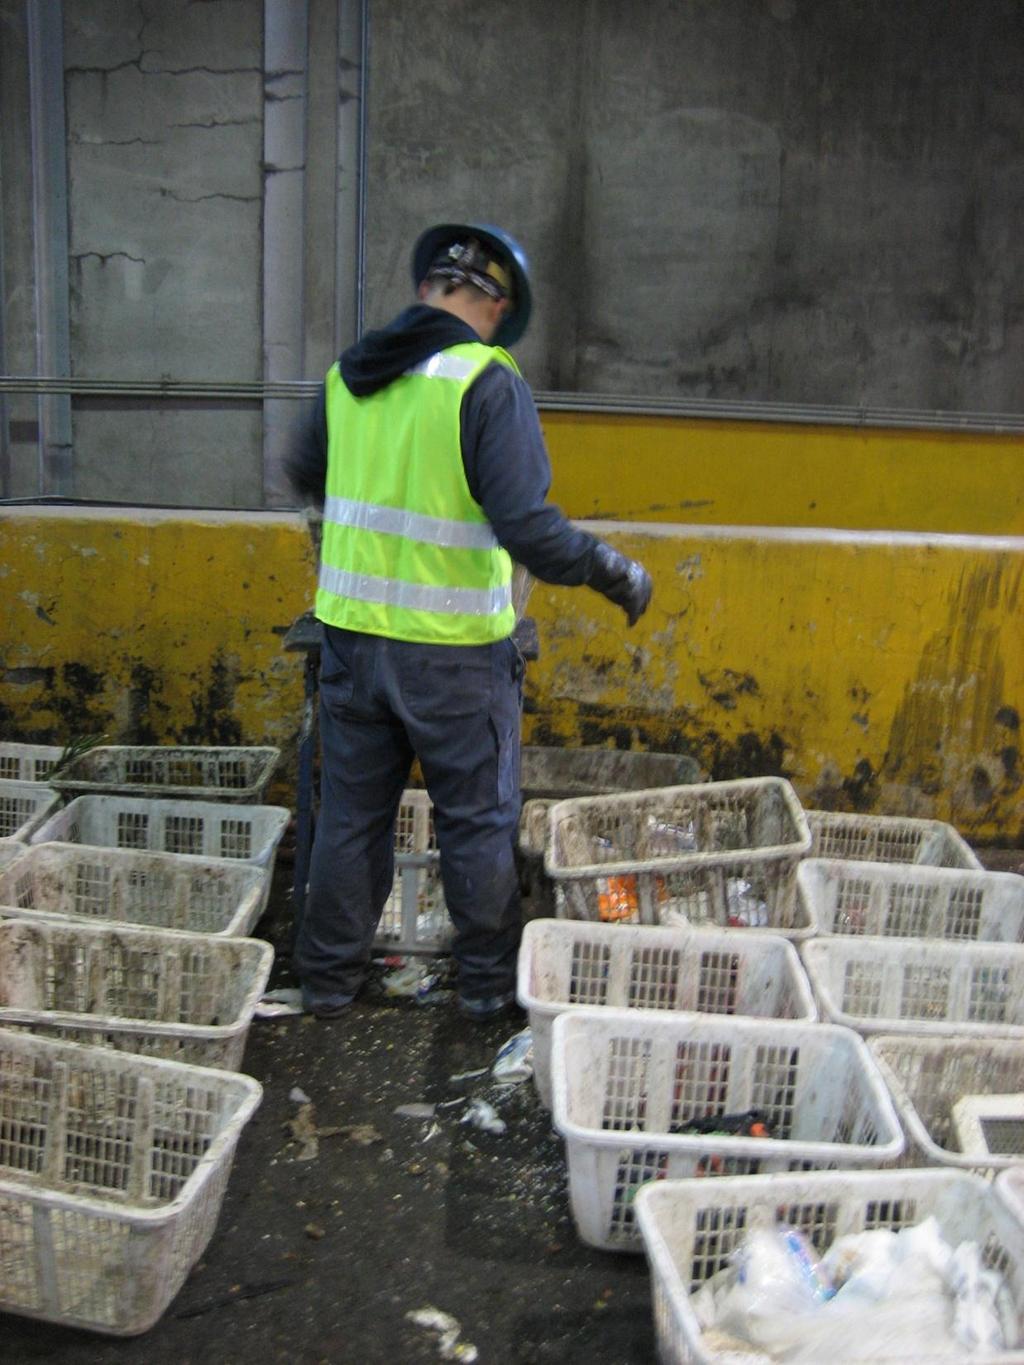 Sorter at work, materials sorted into baskets